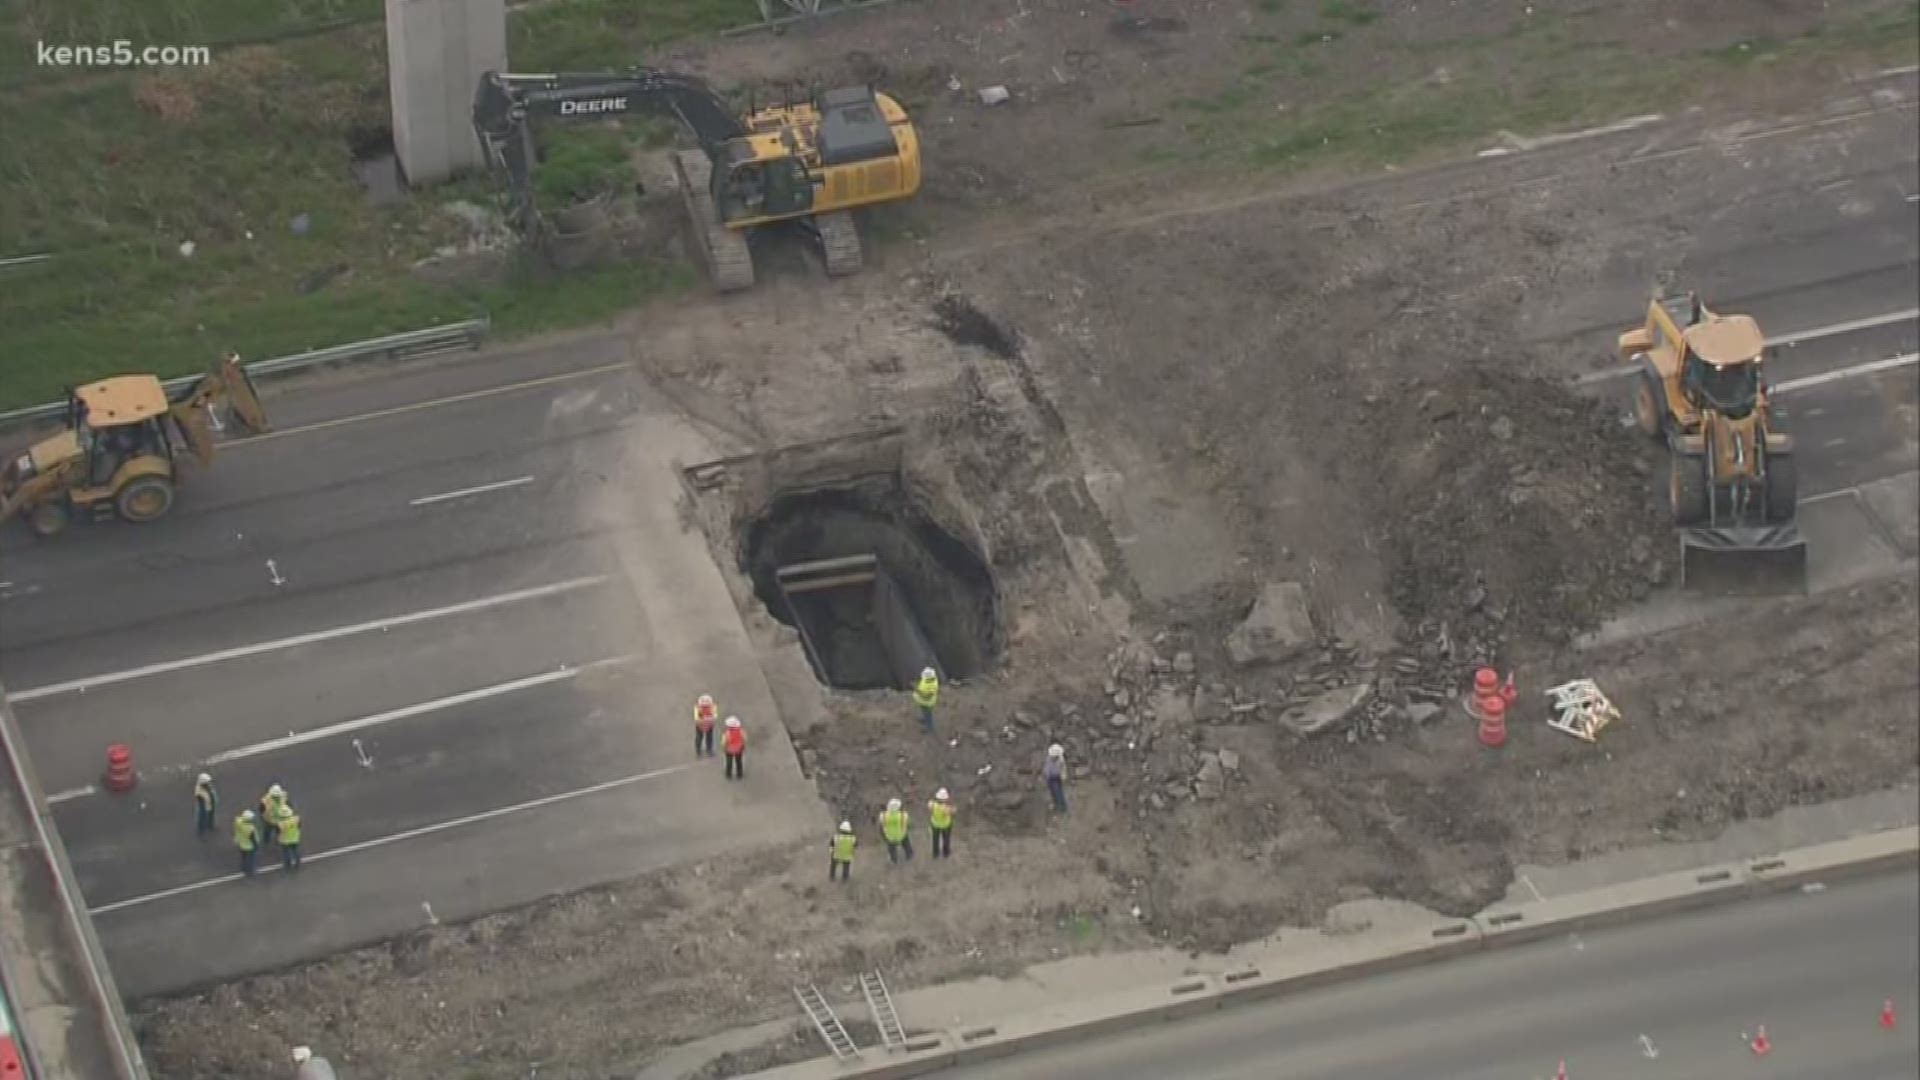 A sinkhole has shut down lanes along I-410 southbound to US 90 westbound, with those US 90 lanes and frontage road expected to be closed through Tuesday night. 

Traffic on 410 is being and will continue to be diverted to the frontage road and taken to cloverleaf ramps to access US 90 westbound. If you can find other alternate routes around the area, you are encouraged to do so.